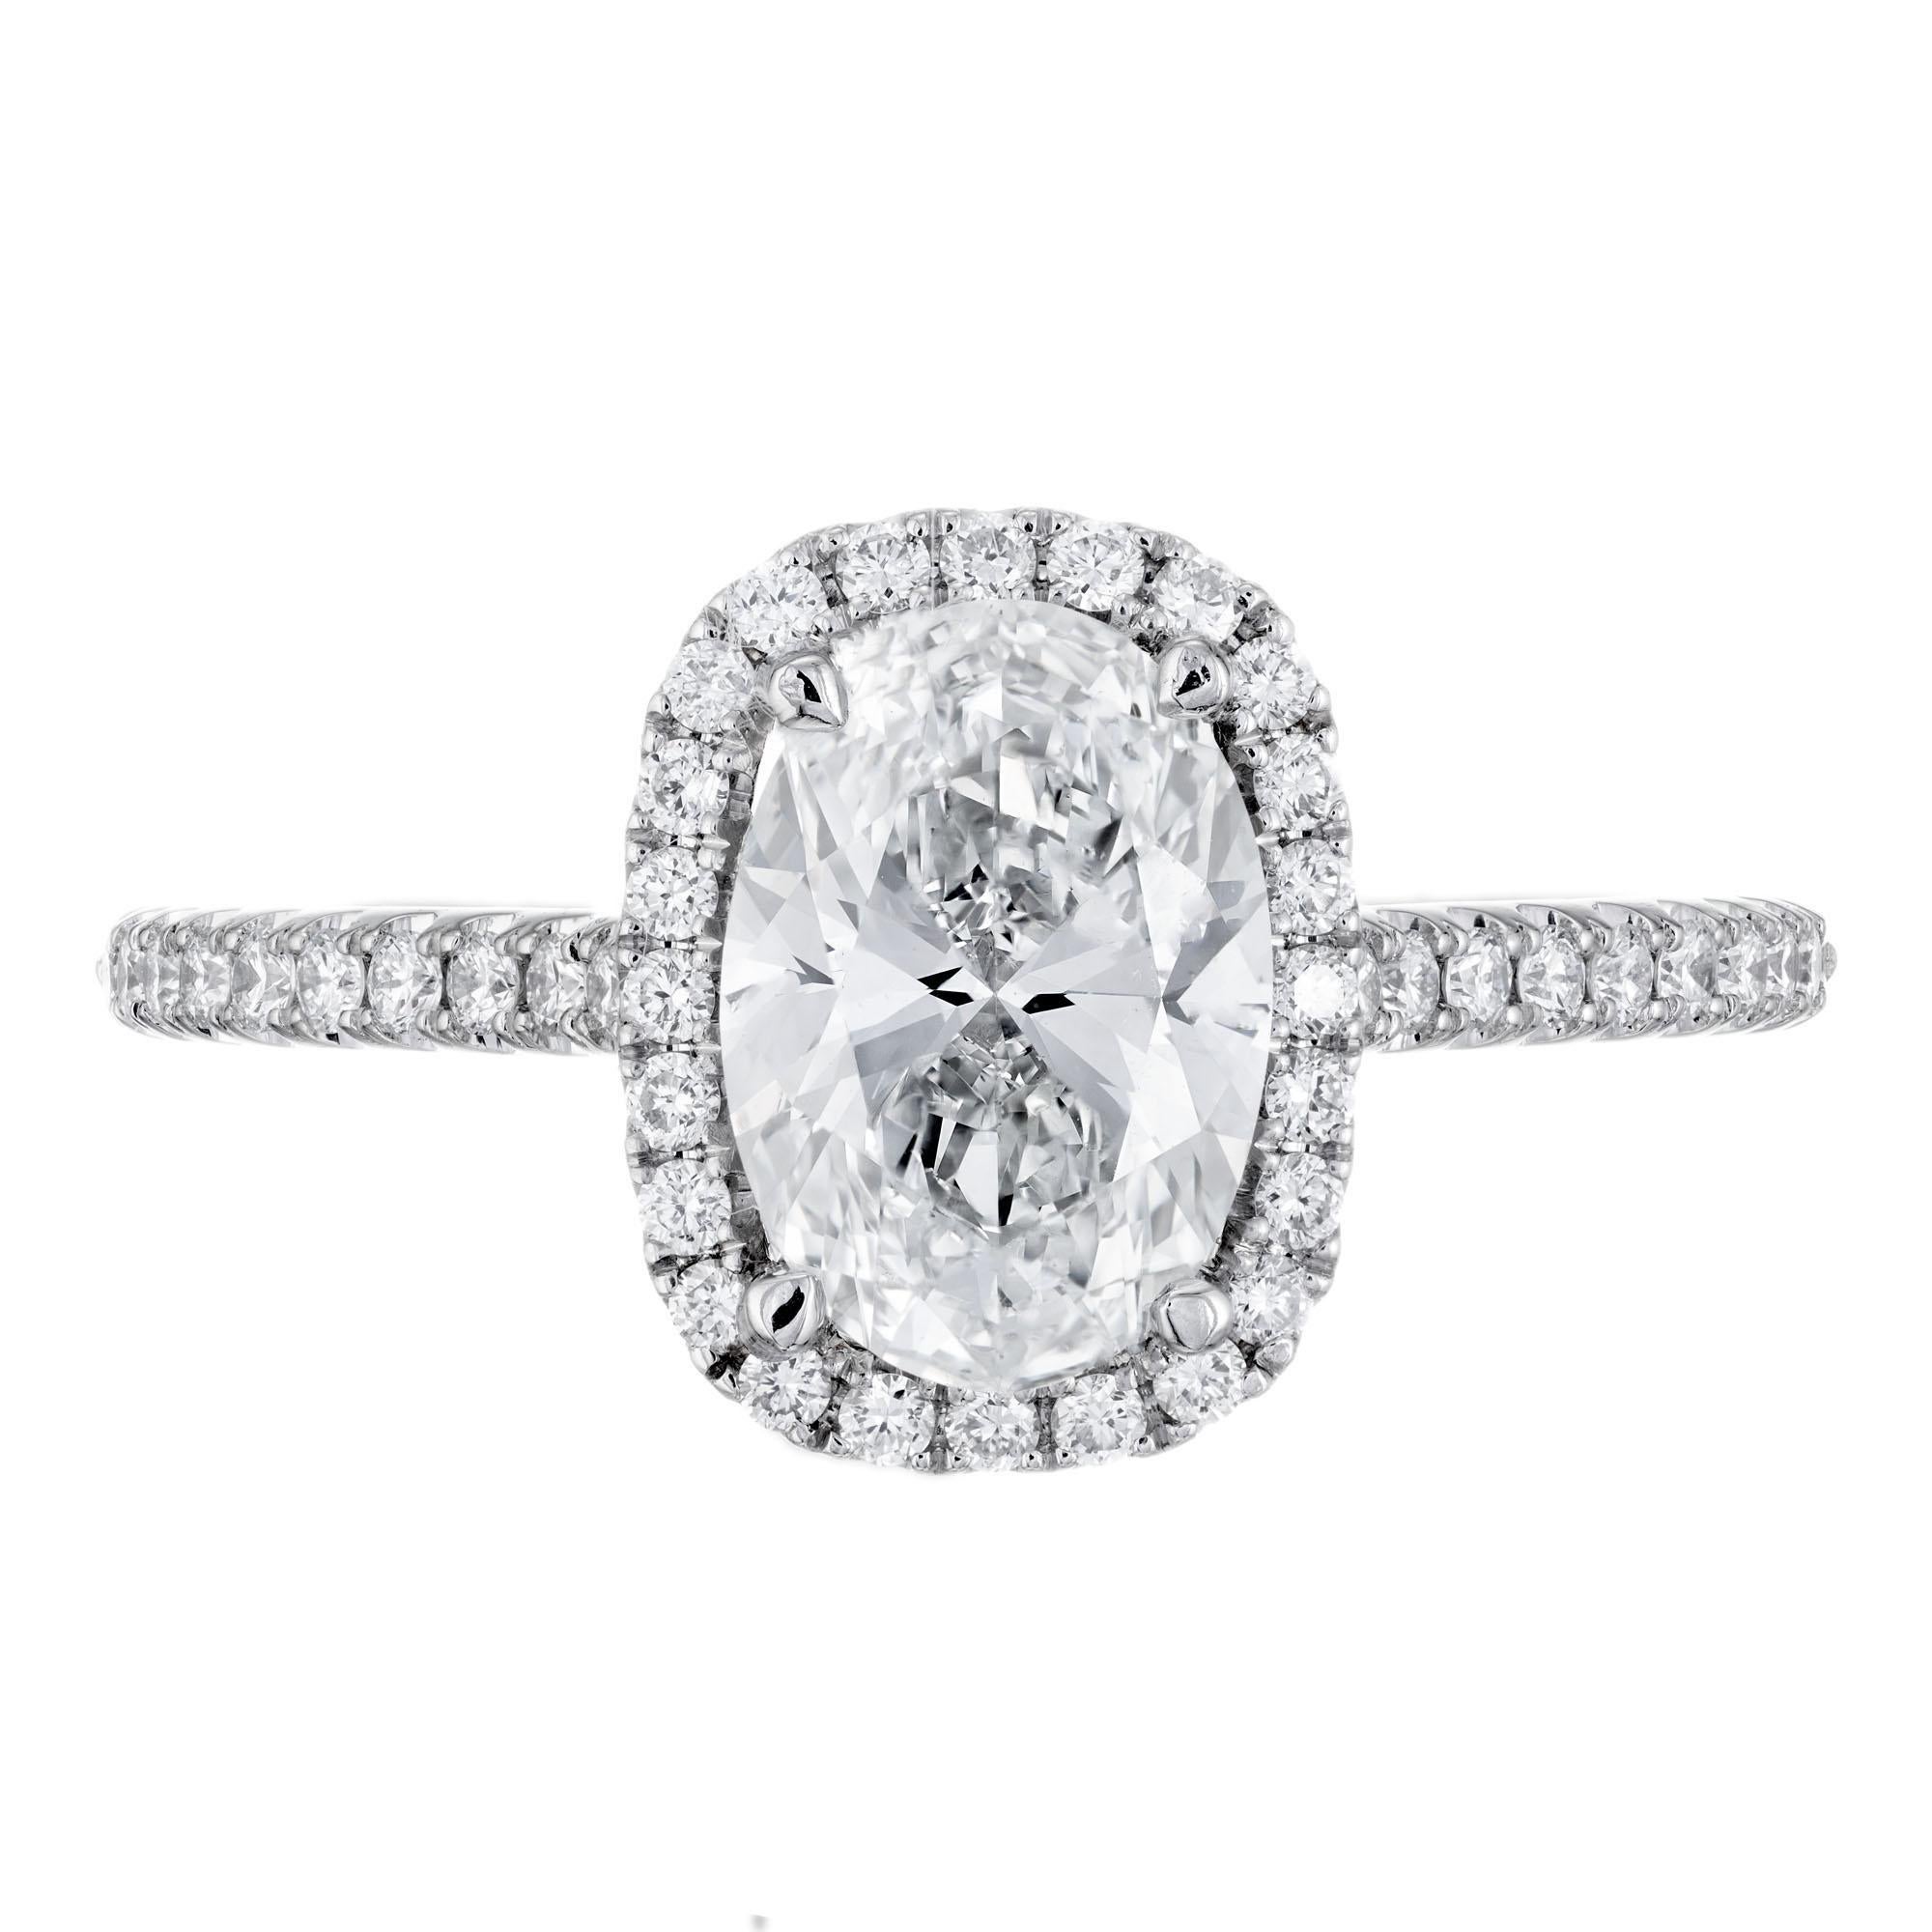 Oval diamond engagement ring. GIA Certified oval center stone with a halo of round diamonds in a platinum setting. Created in the Peter Suchy Workshop. 

1 oval brilliant cut diamond H, VS, approx. 1.51cts GIA Certificate # 2191689944
46 round